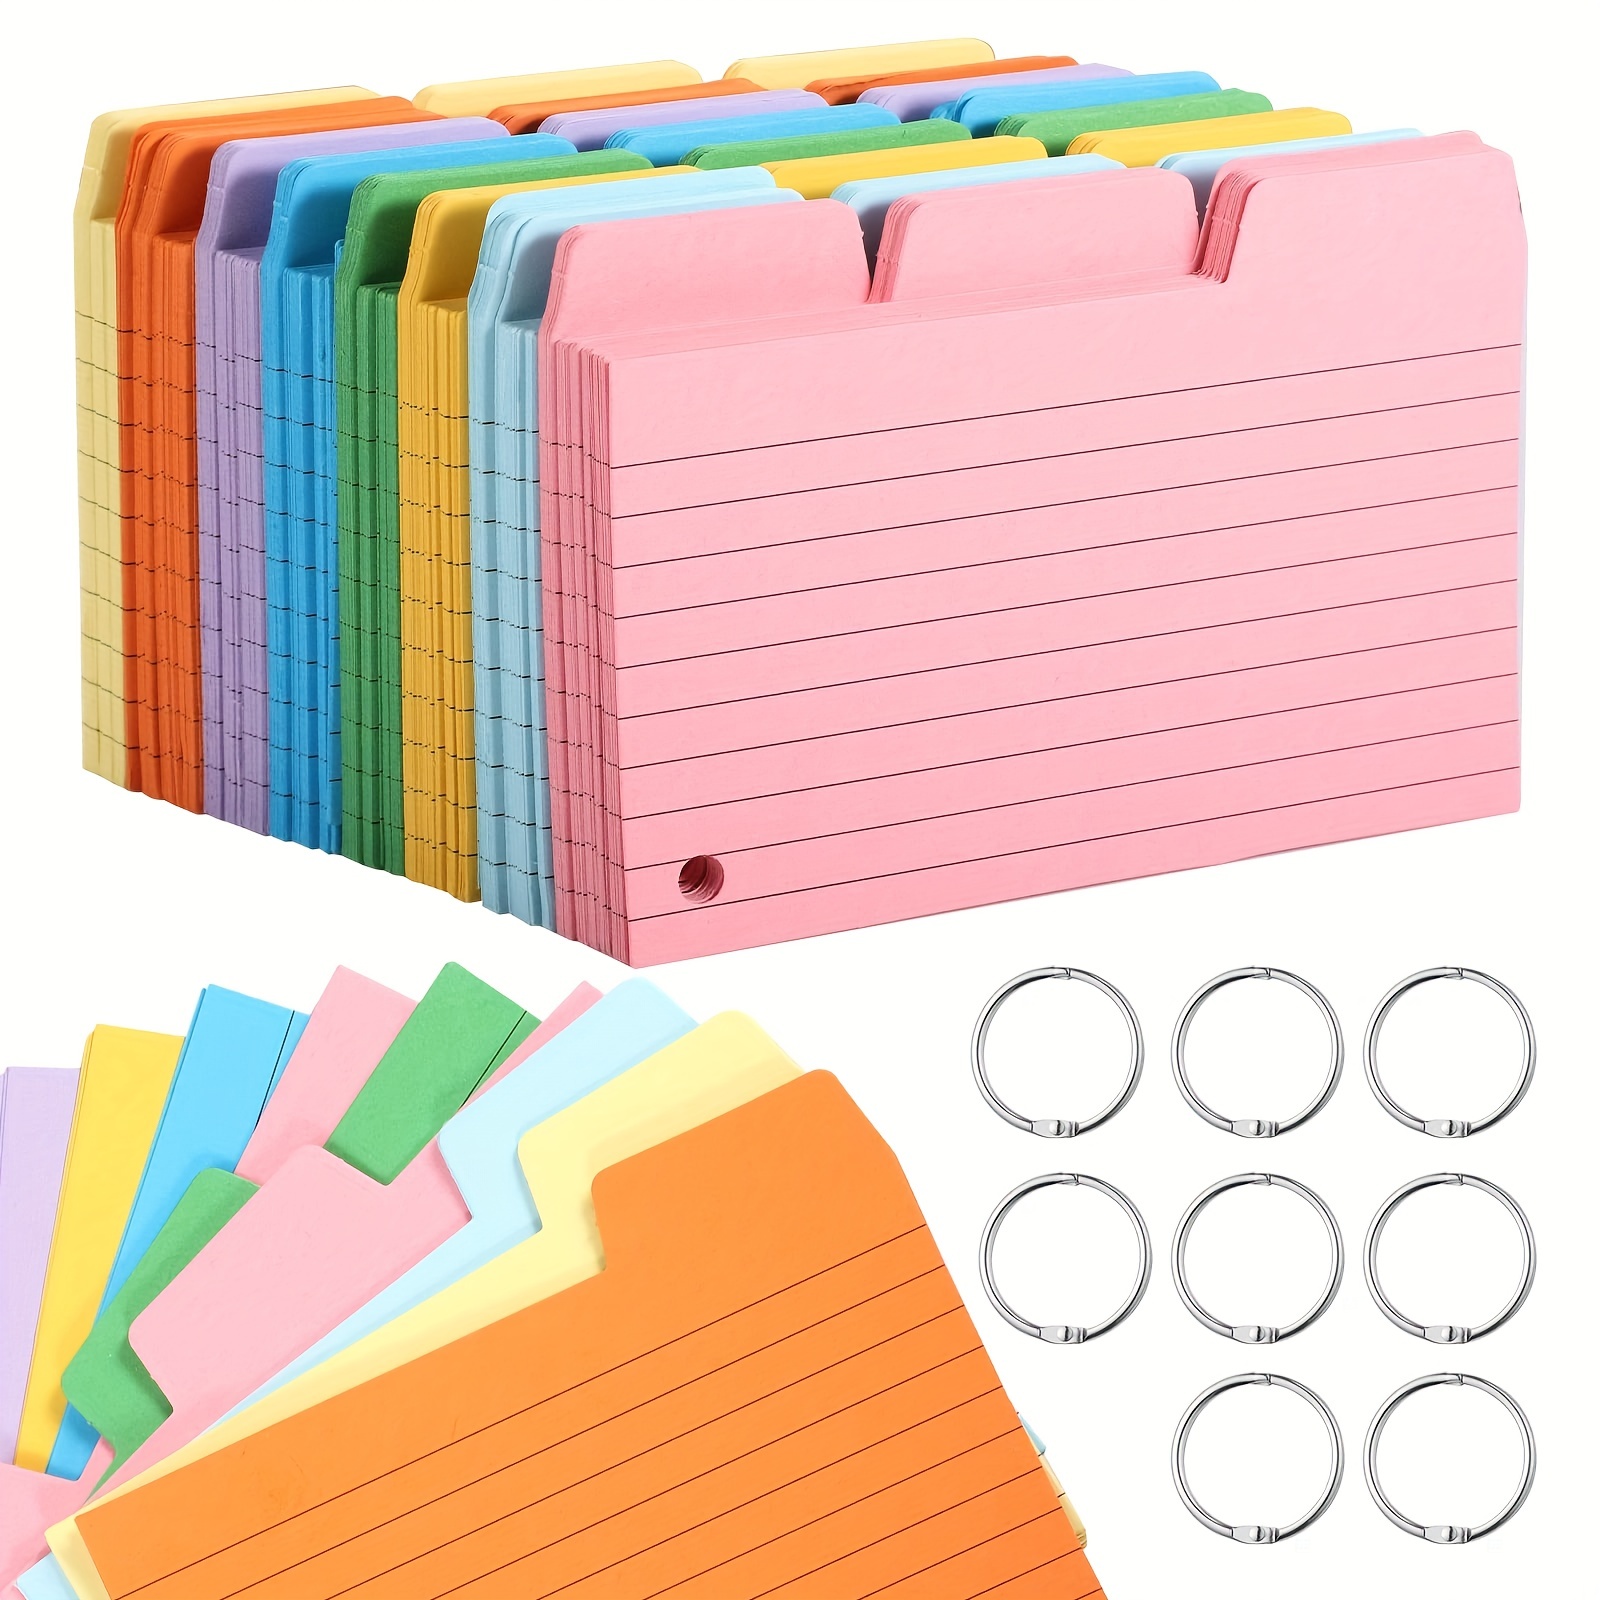 Findit Tabbed Index Cards for Office Organization - Pack of 36 Assorted Index Card Dividers - College Supplies, 4x6 Inches